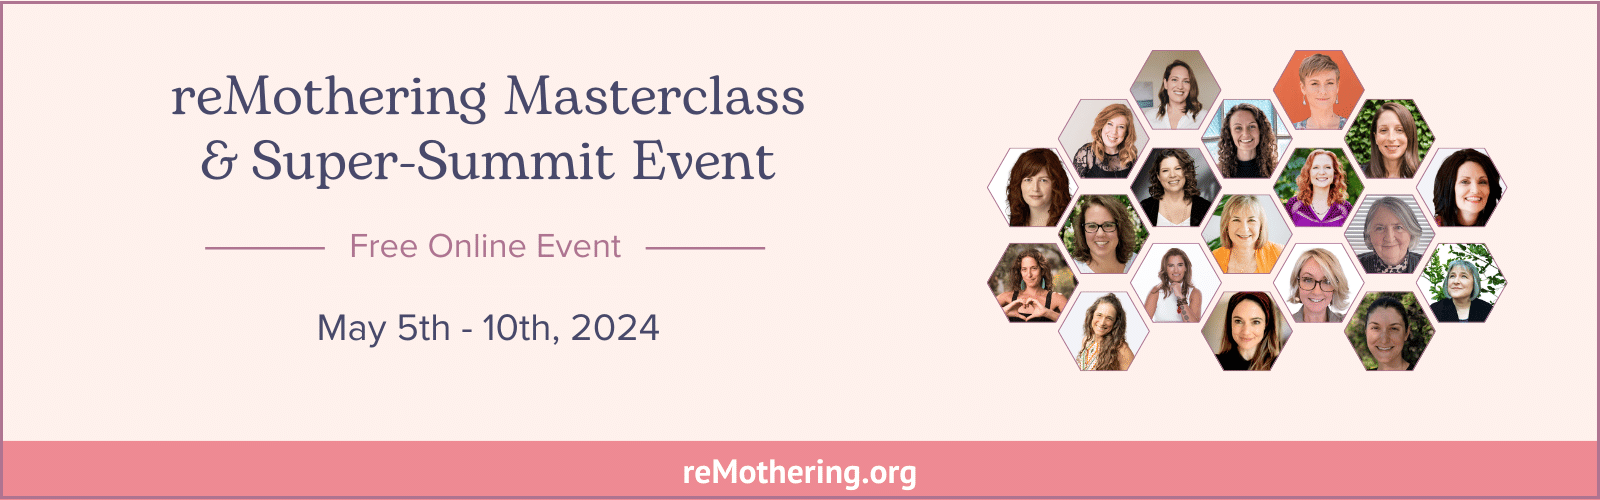 reMothering Masterclass - save the date